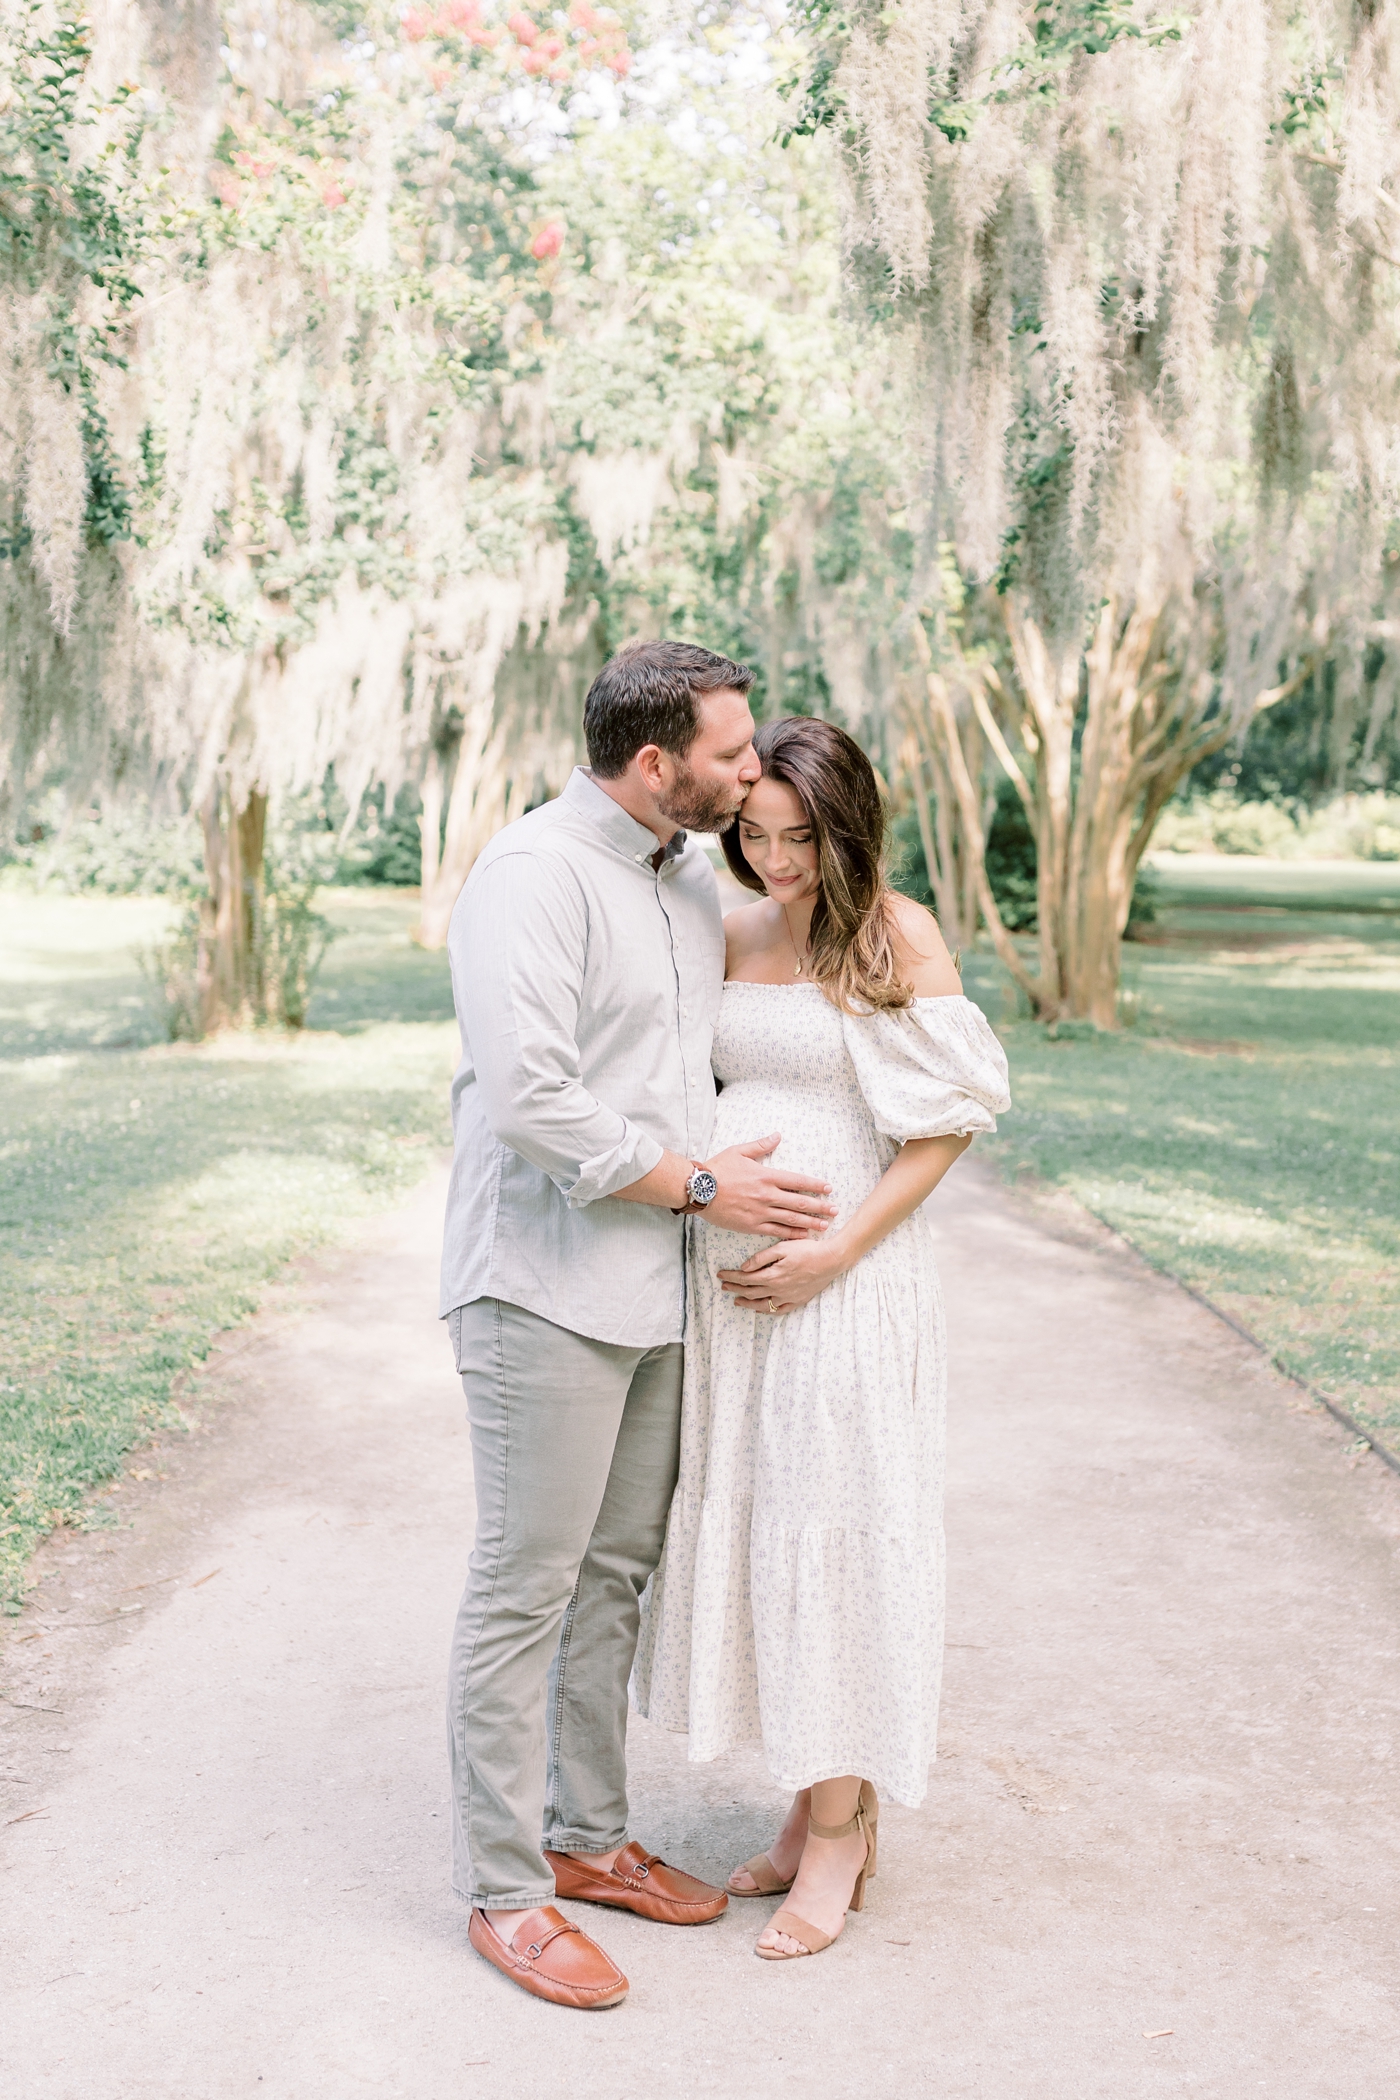 Dad to be kissing mom on the head | Photo by Caitlyn Motycka Photography.